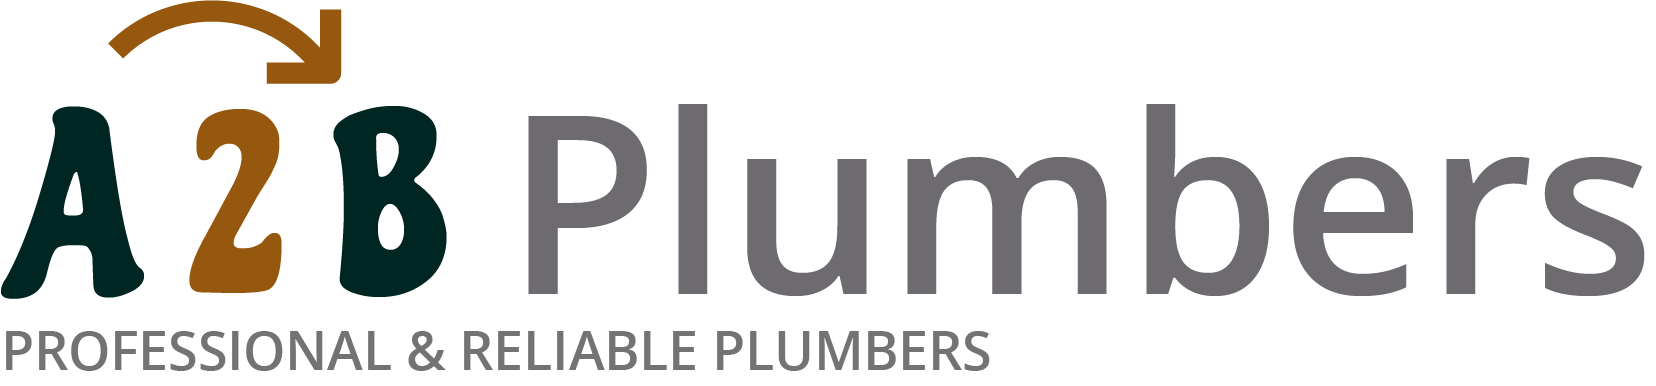 If you need a boiler installed, a radiator repaired or a leaking tap fixed, call us now - we provide services for properties in Frinton and the local area.